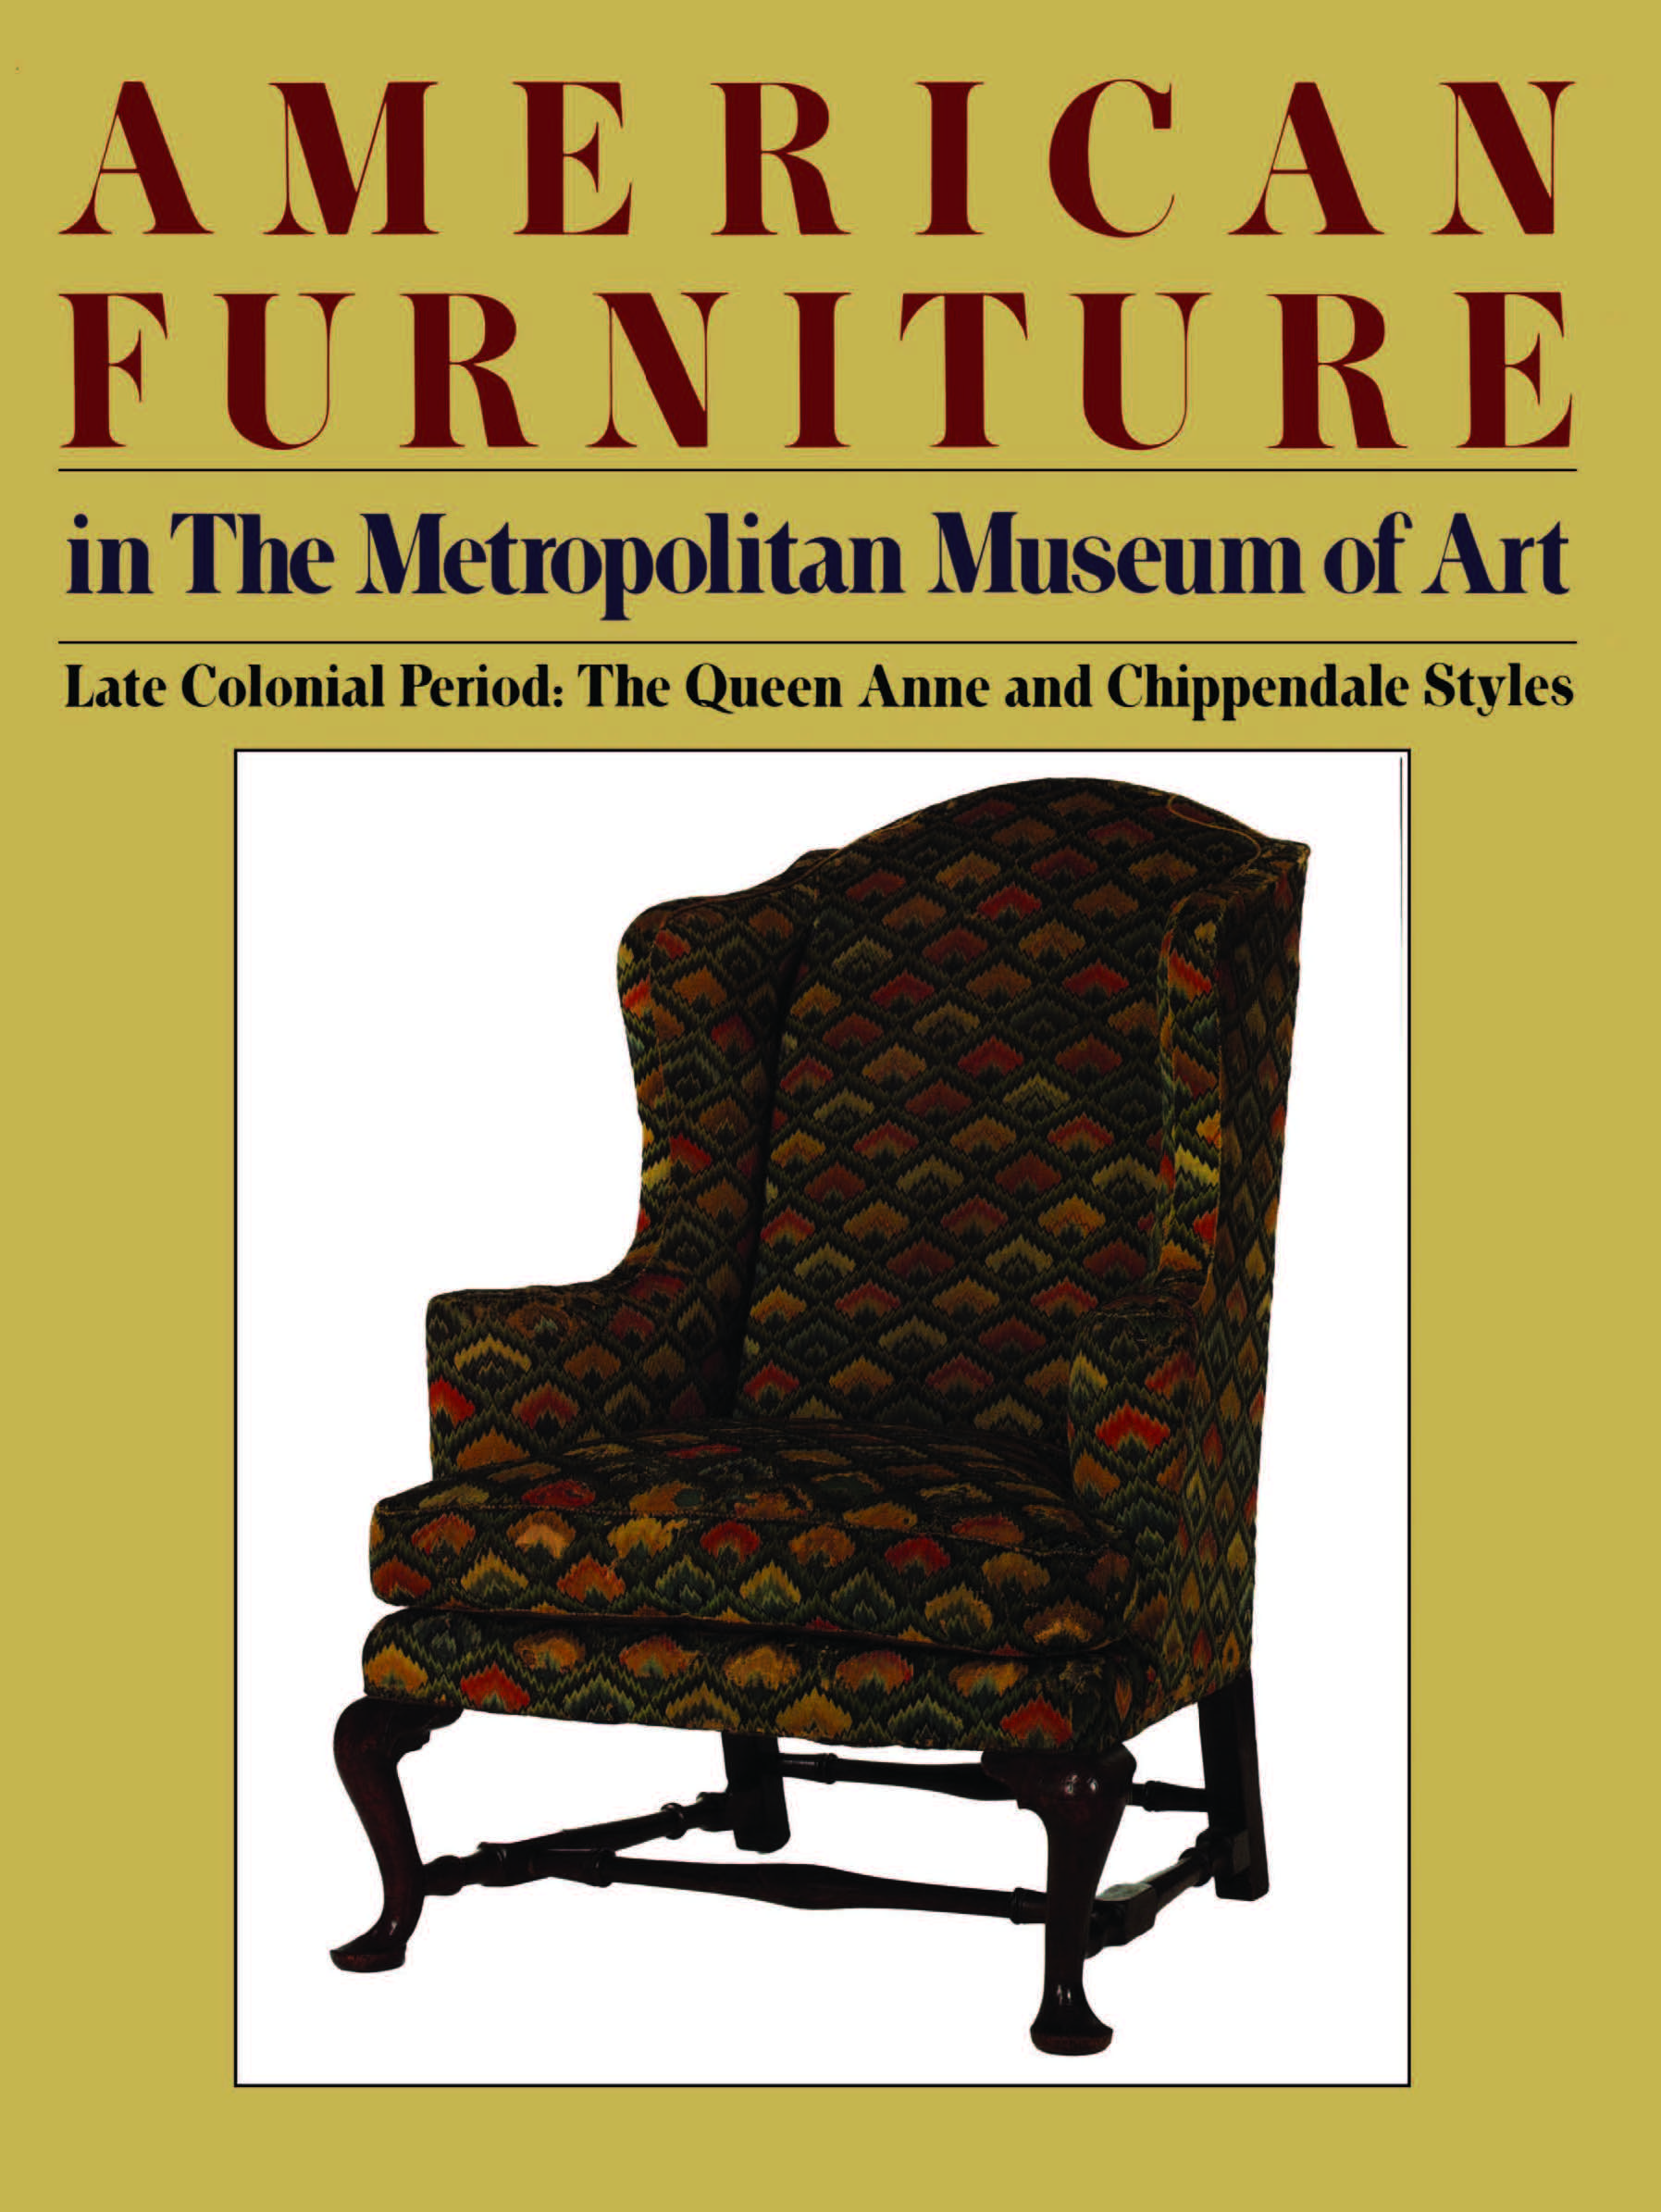 American Furniture in The Metropolitan Museum of Art : Vol. II. Late Colonial Period: The Queen Anne and Chippendale Styles / Morrison H. Heckscher